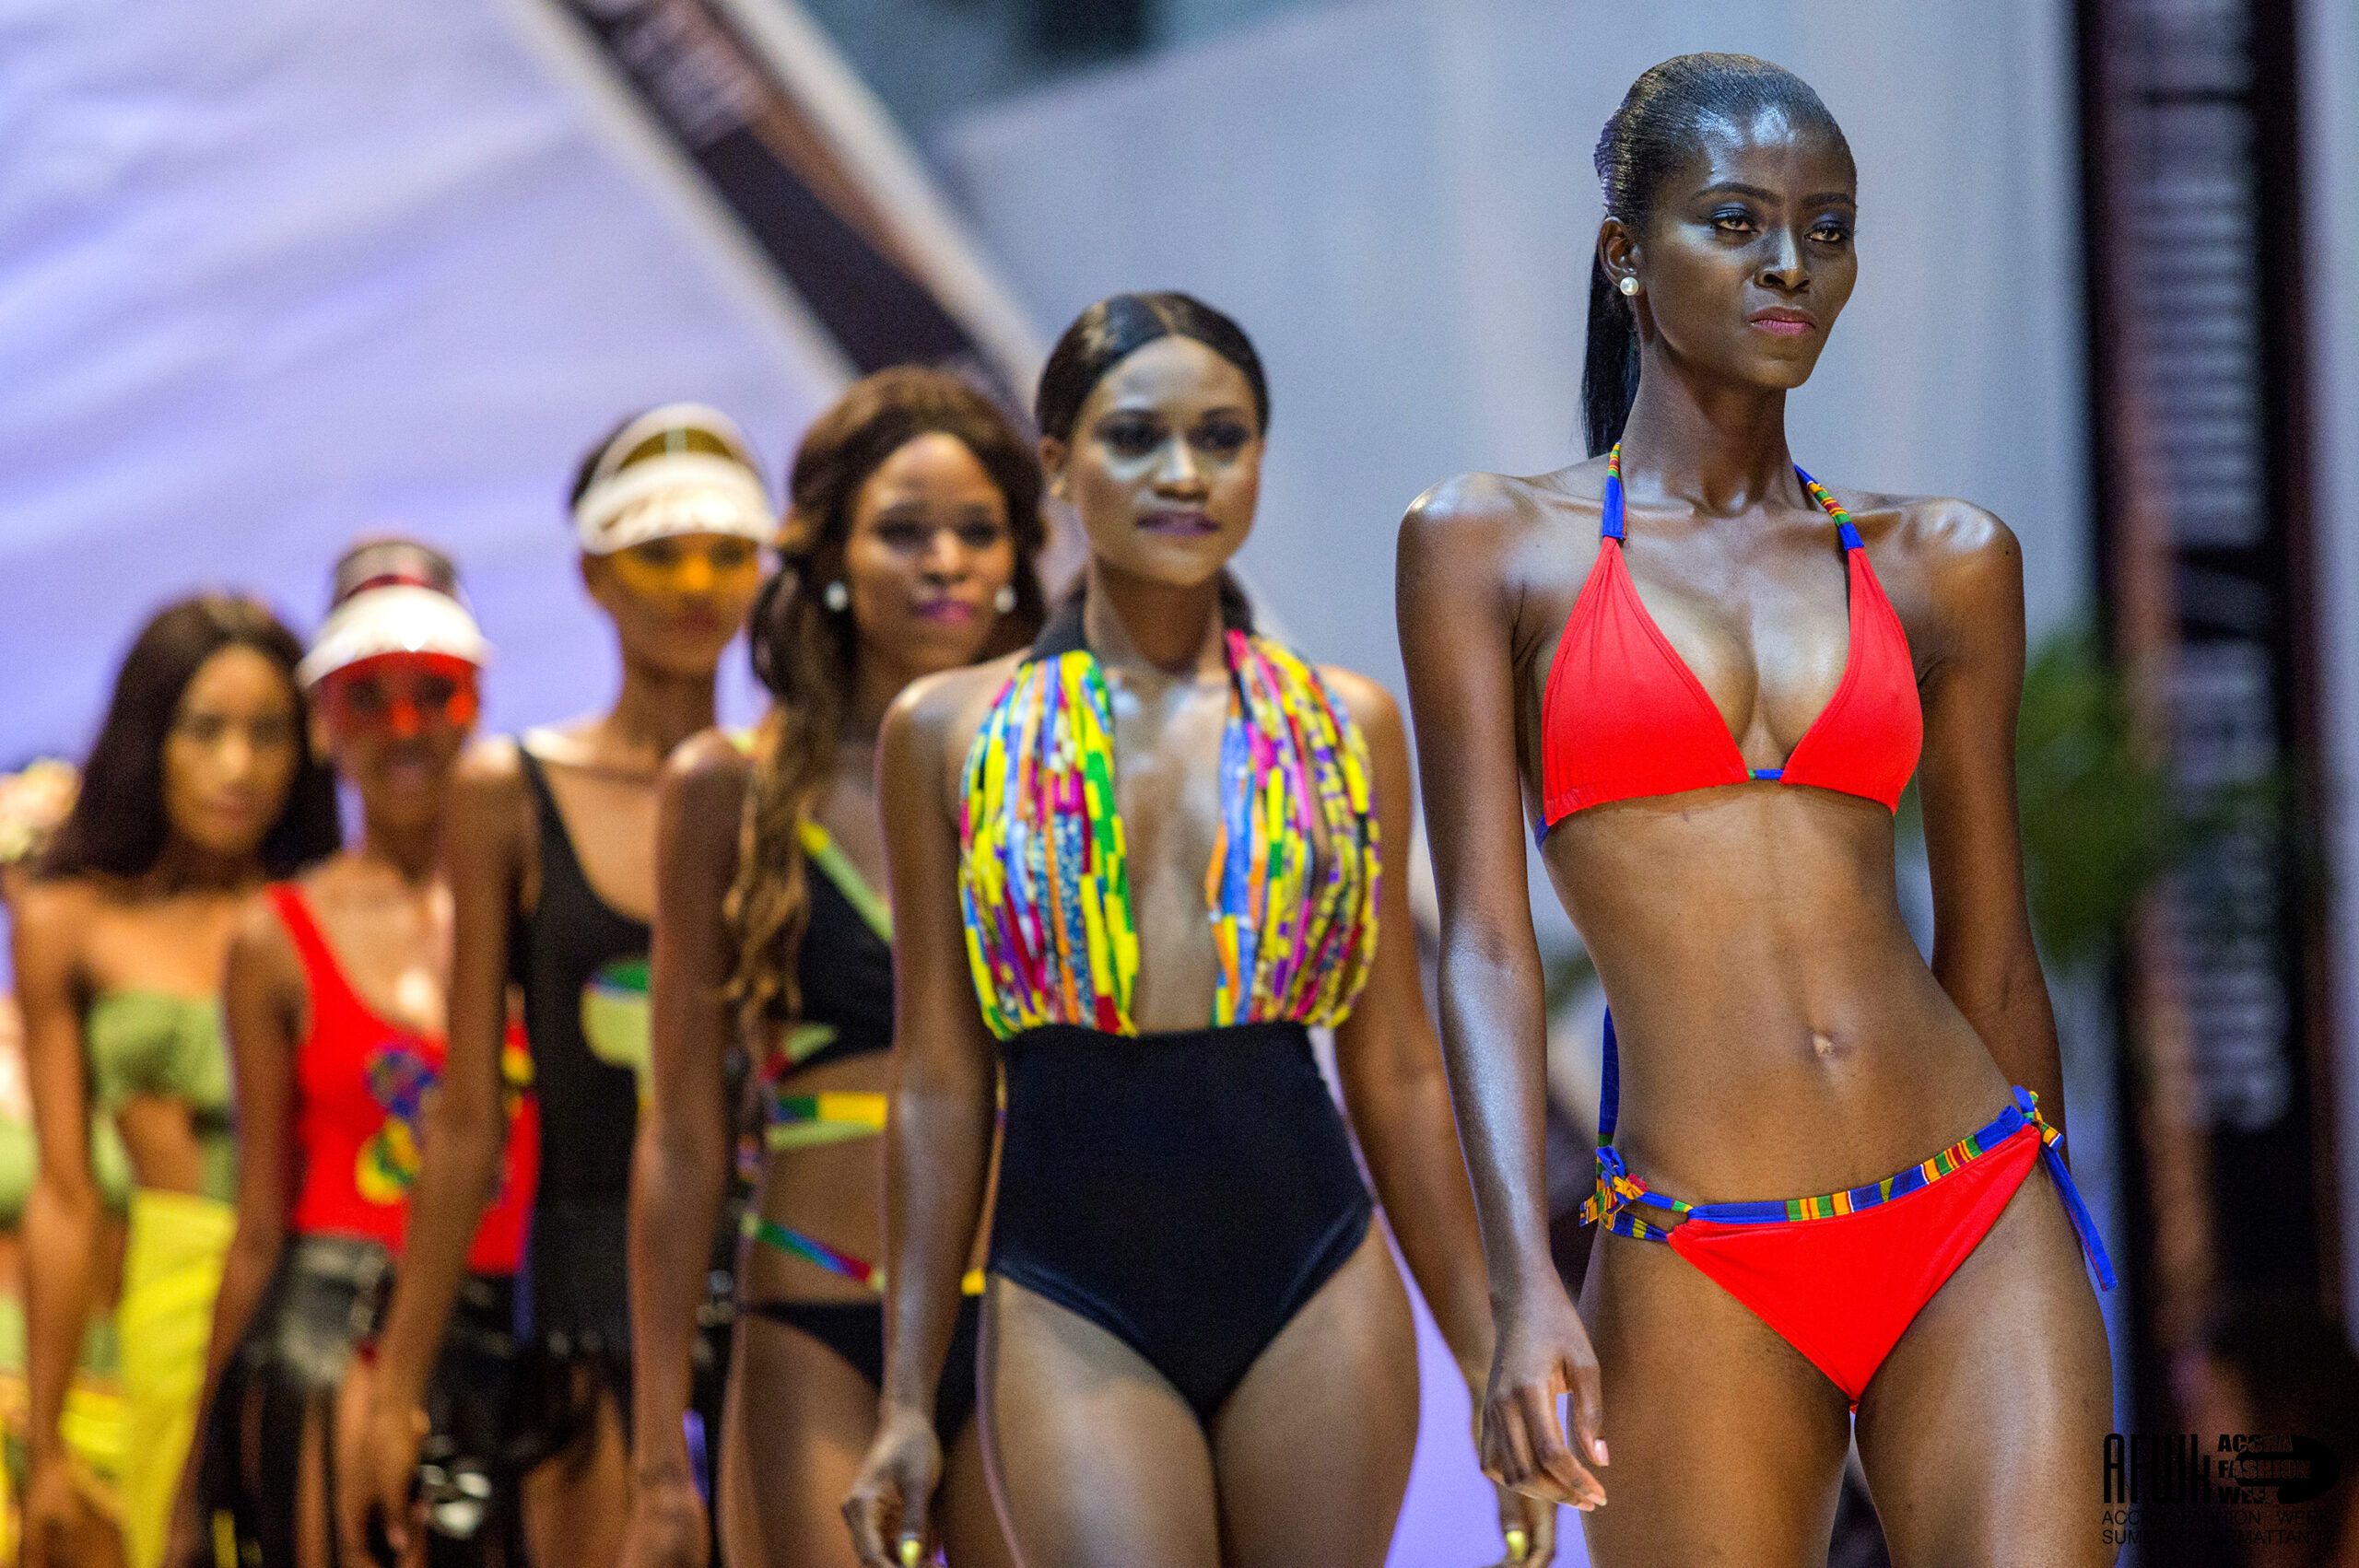 Donnakeshley (Netherlands) @ Accra Fashion Week S/H17 Swimwear Deluxe Show